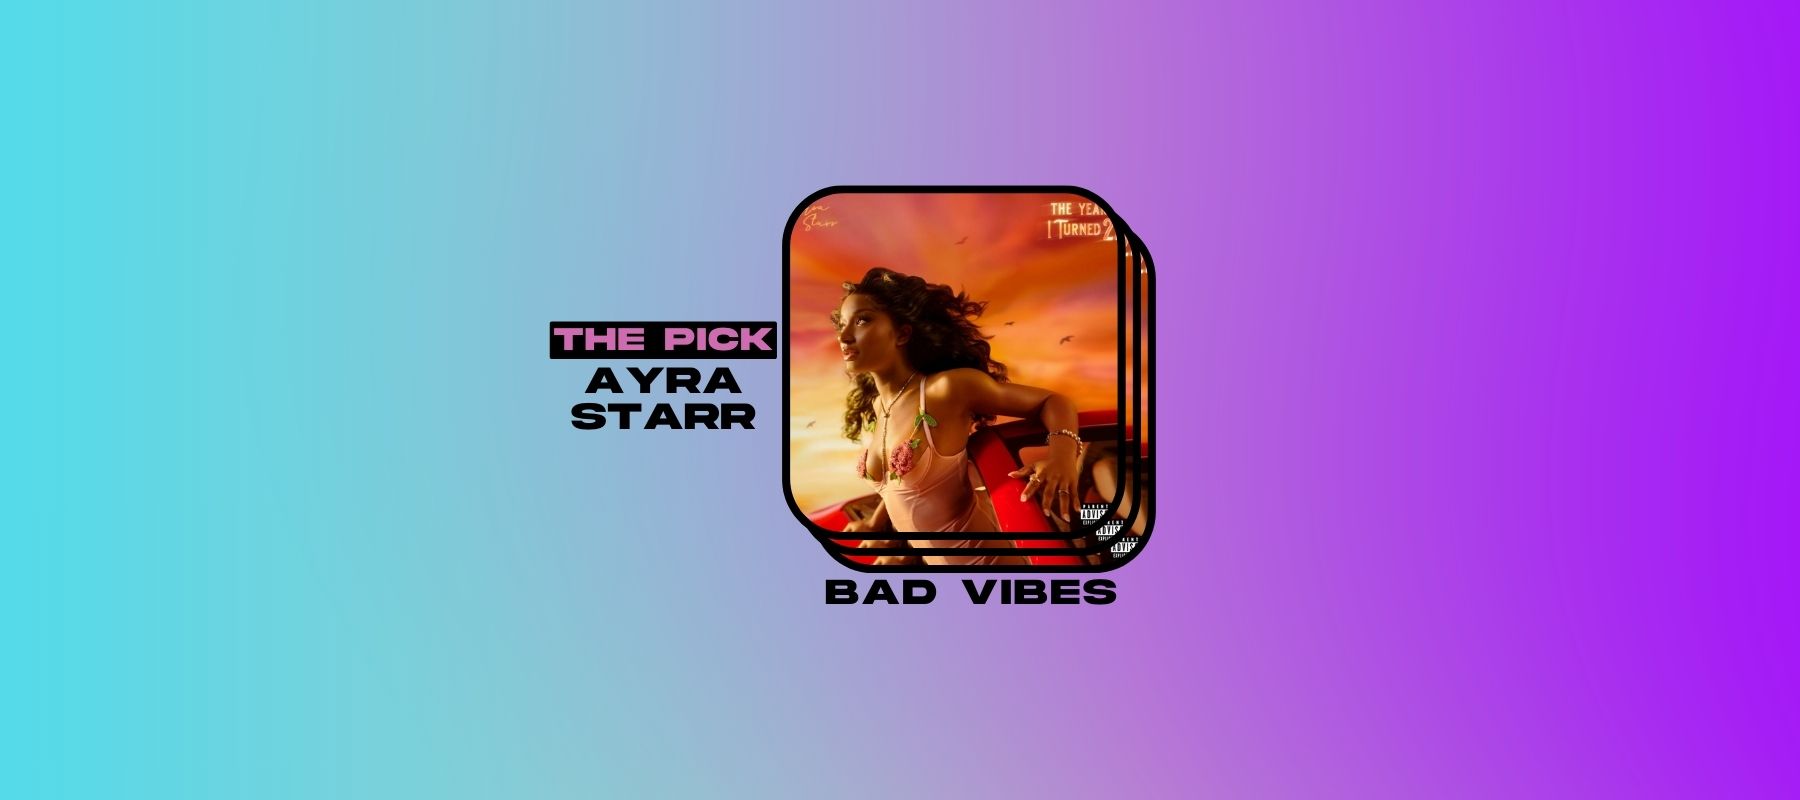 Ayra Starr and Seyi Vibez Just Want to Chill on “Bad Vibes”